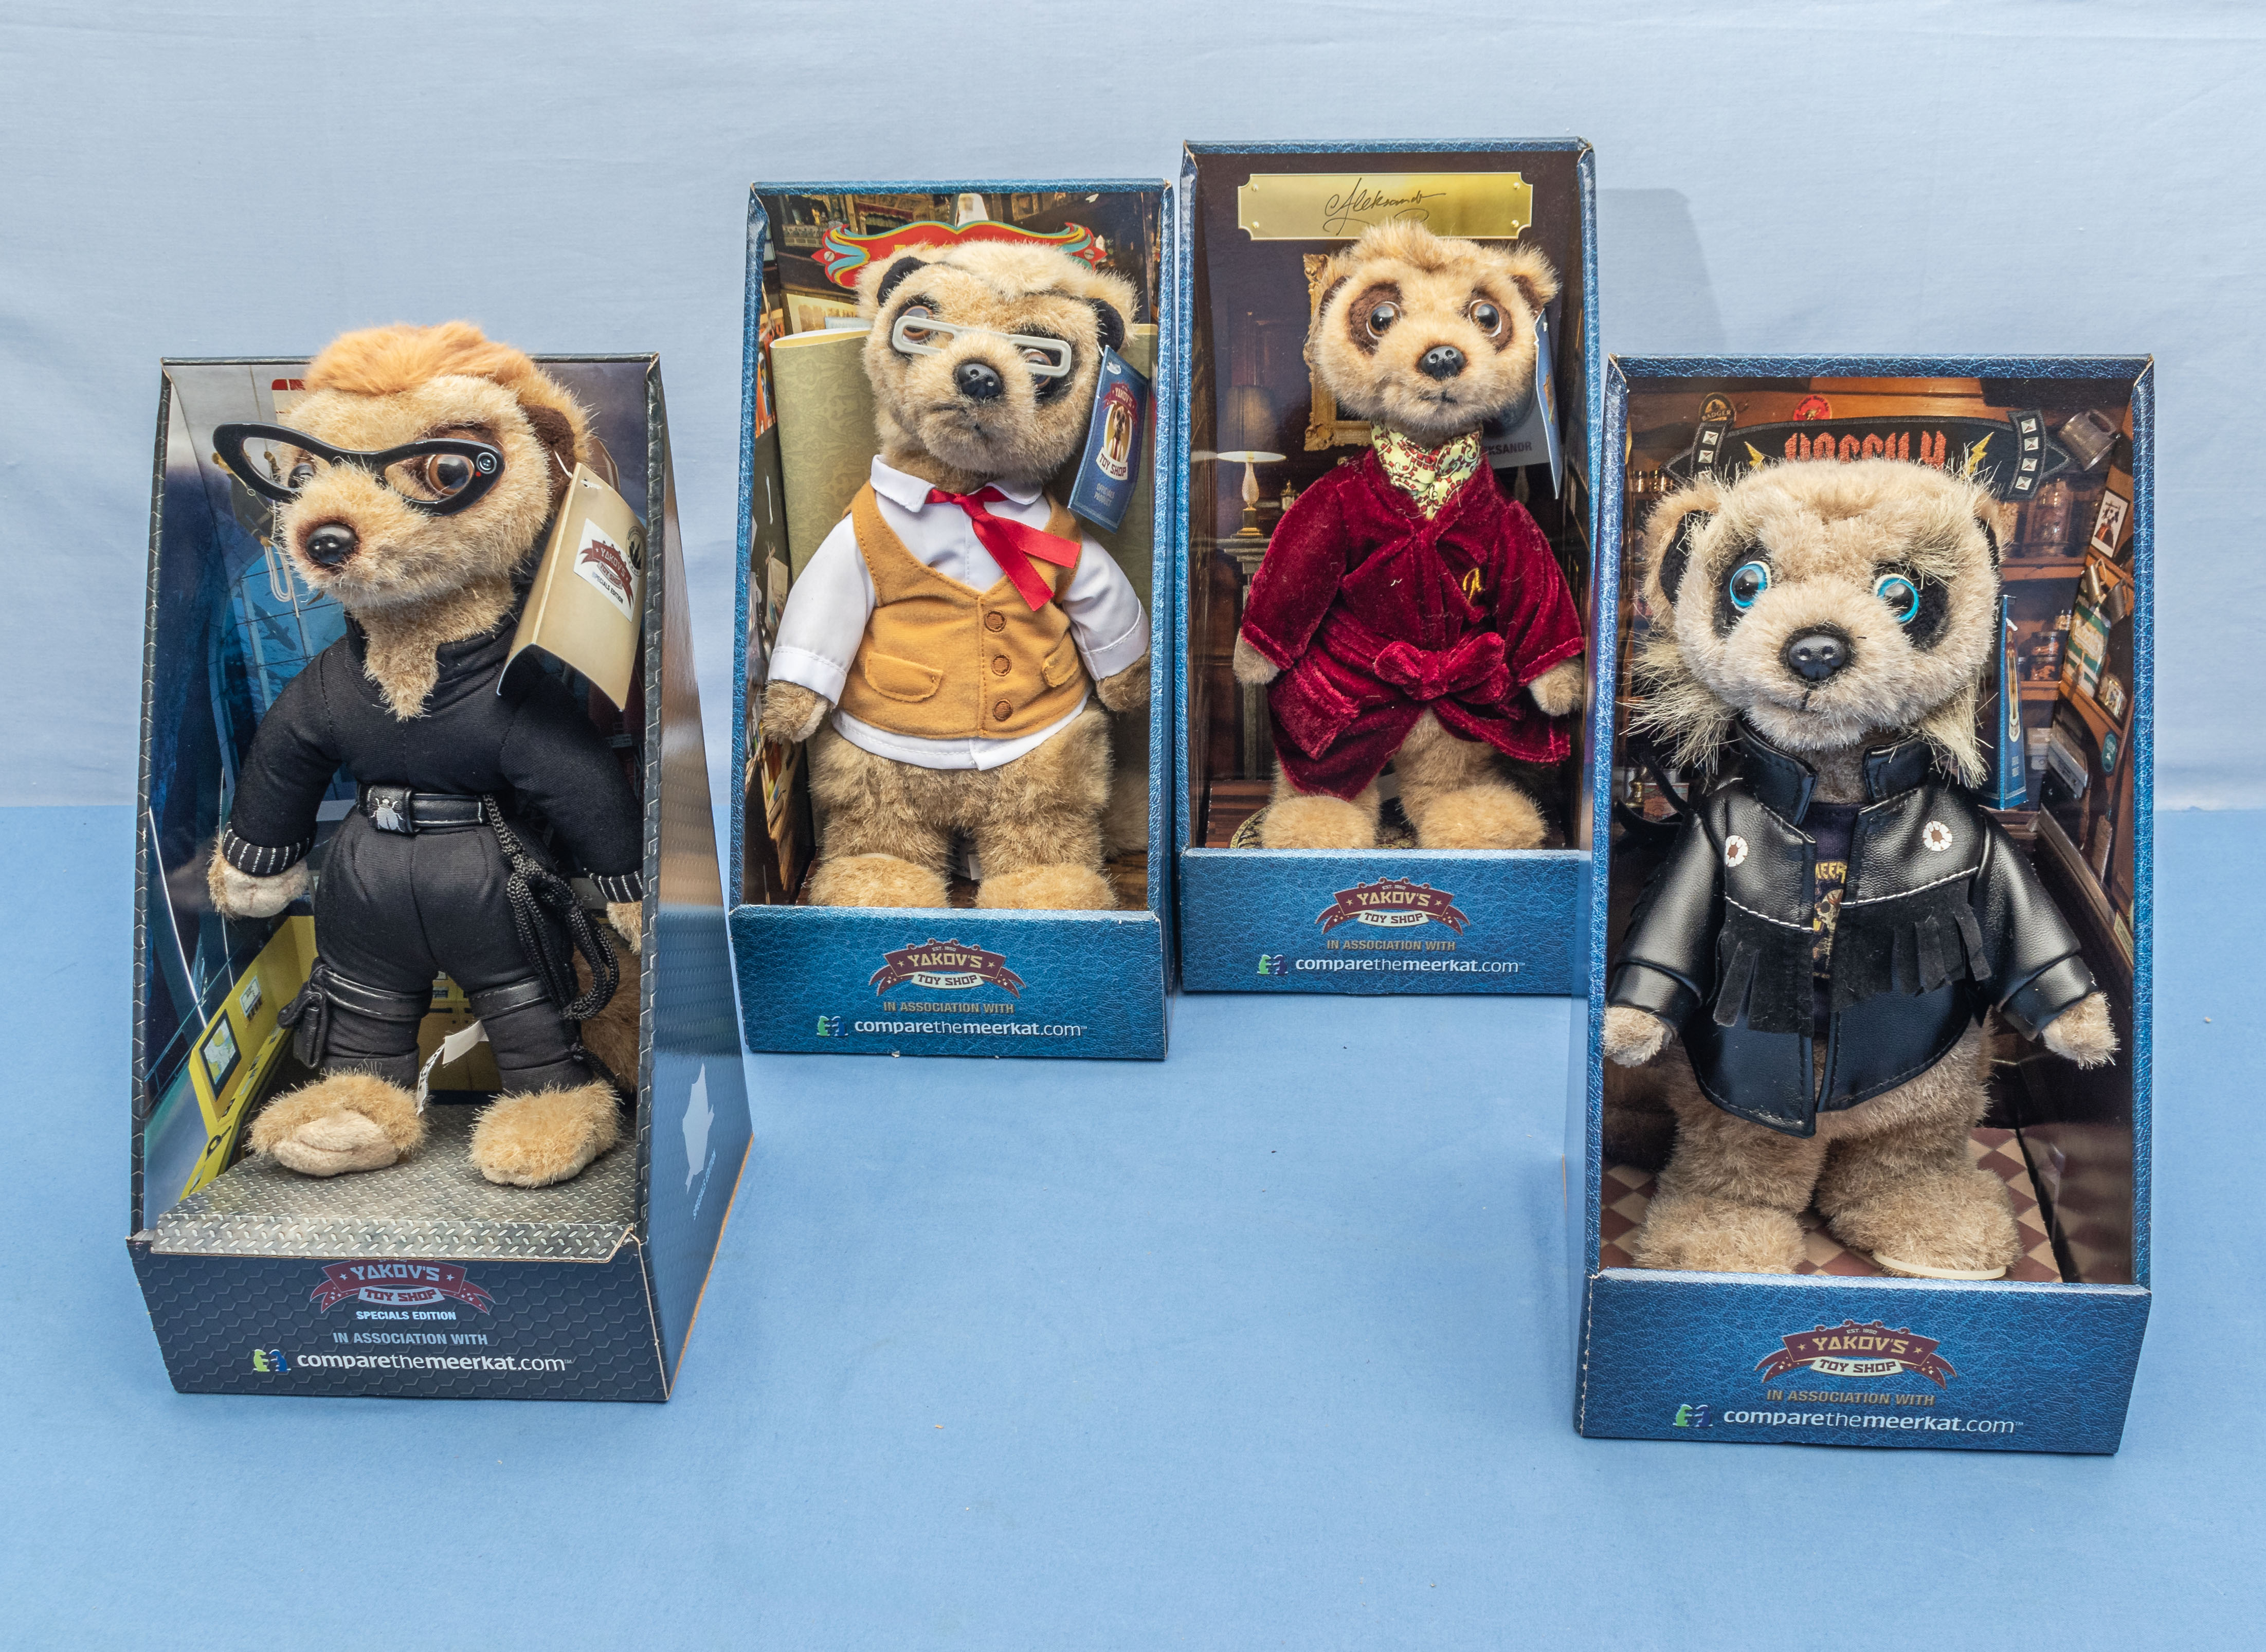 Four Meercat collectible toys